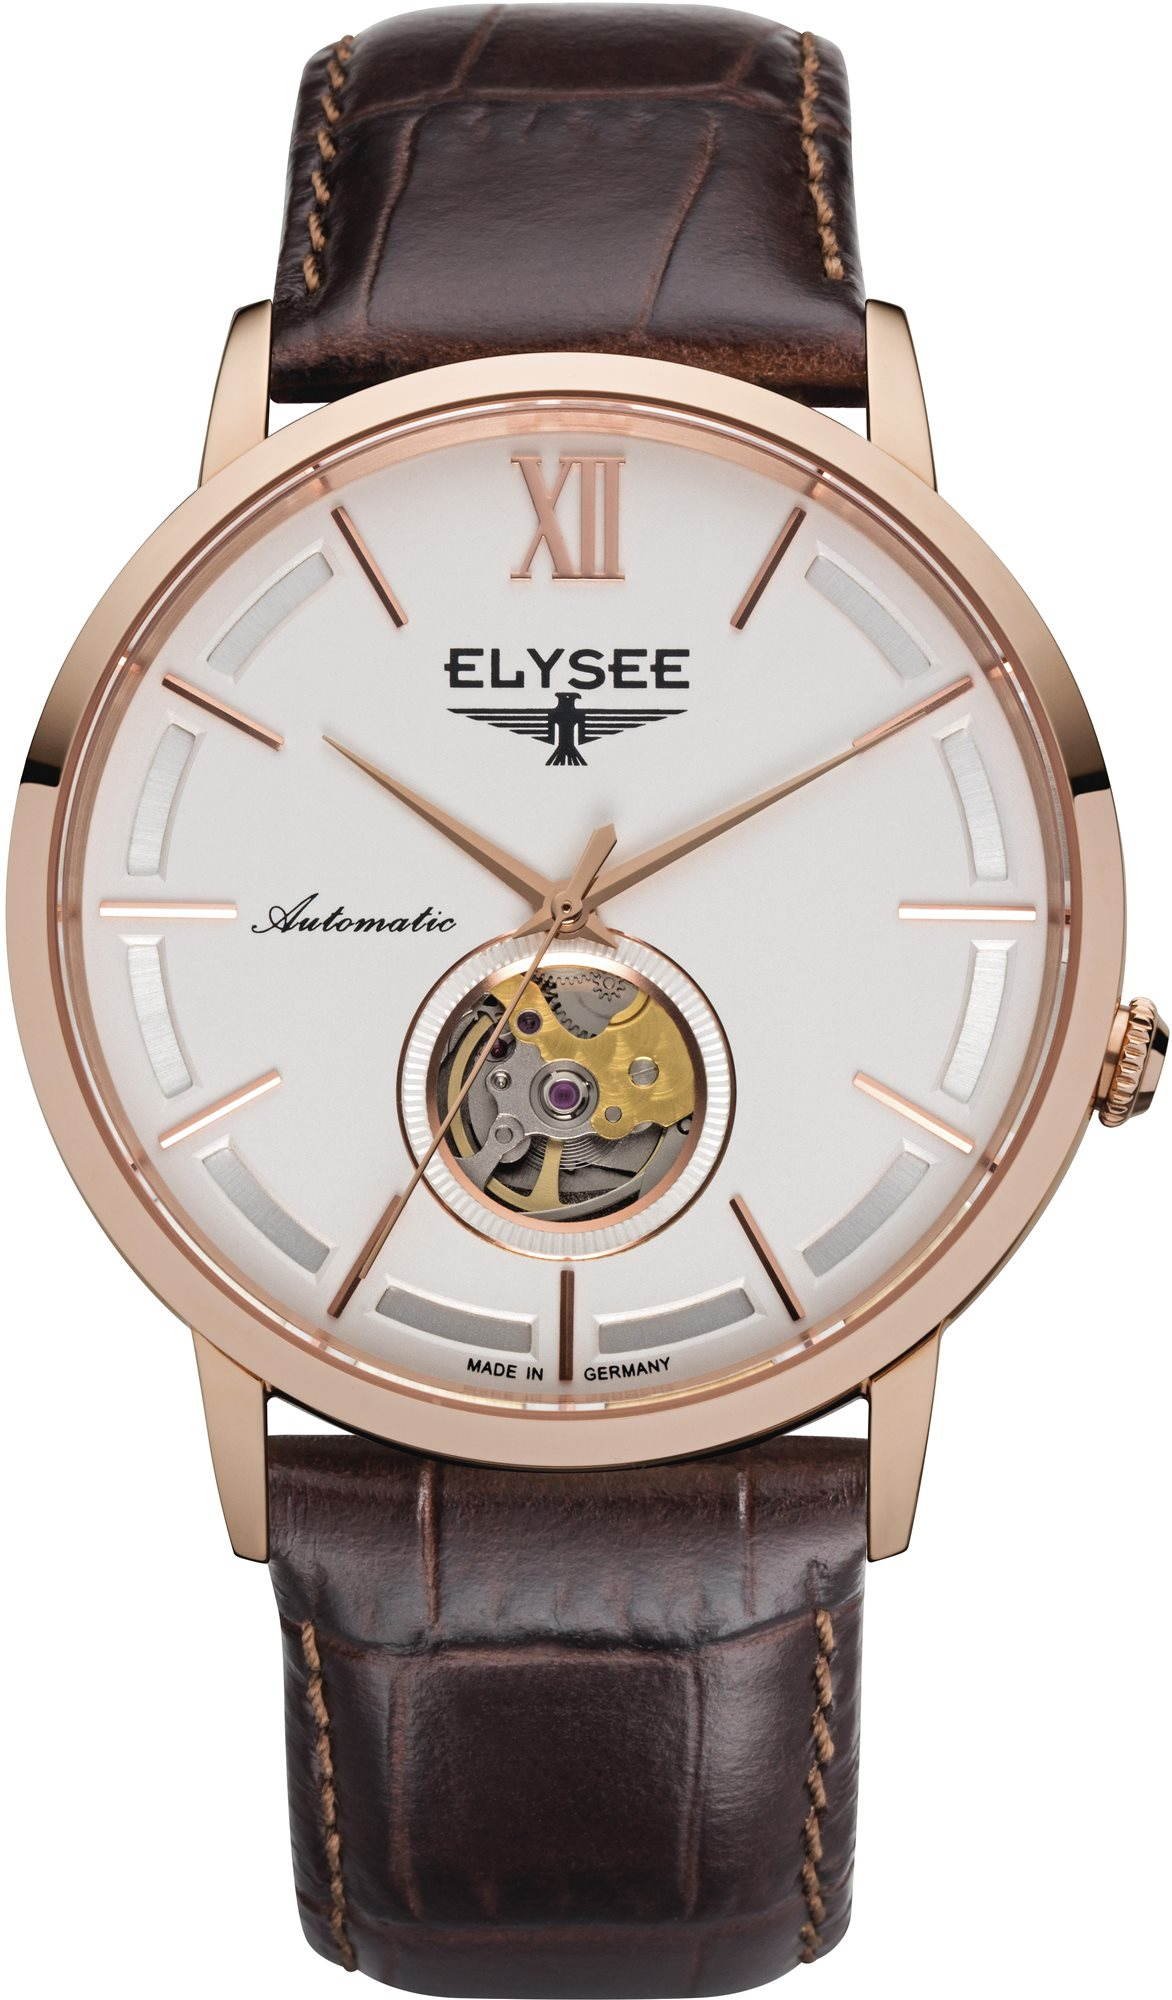 ELYSEE Men's 13281 Executive-Edition Analog Display Automatic Self Wind  Brown Watch : Amazon.in: Fashion